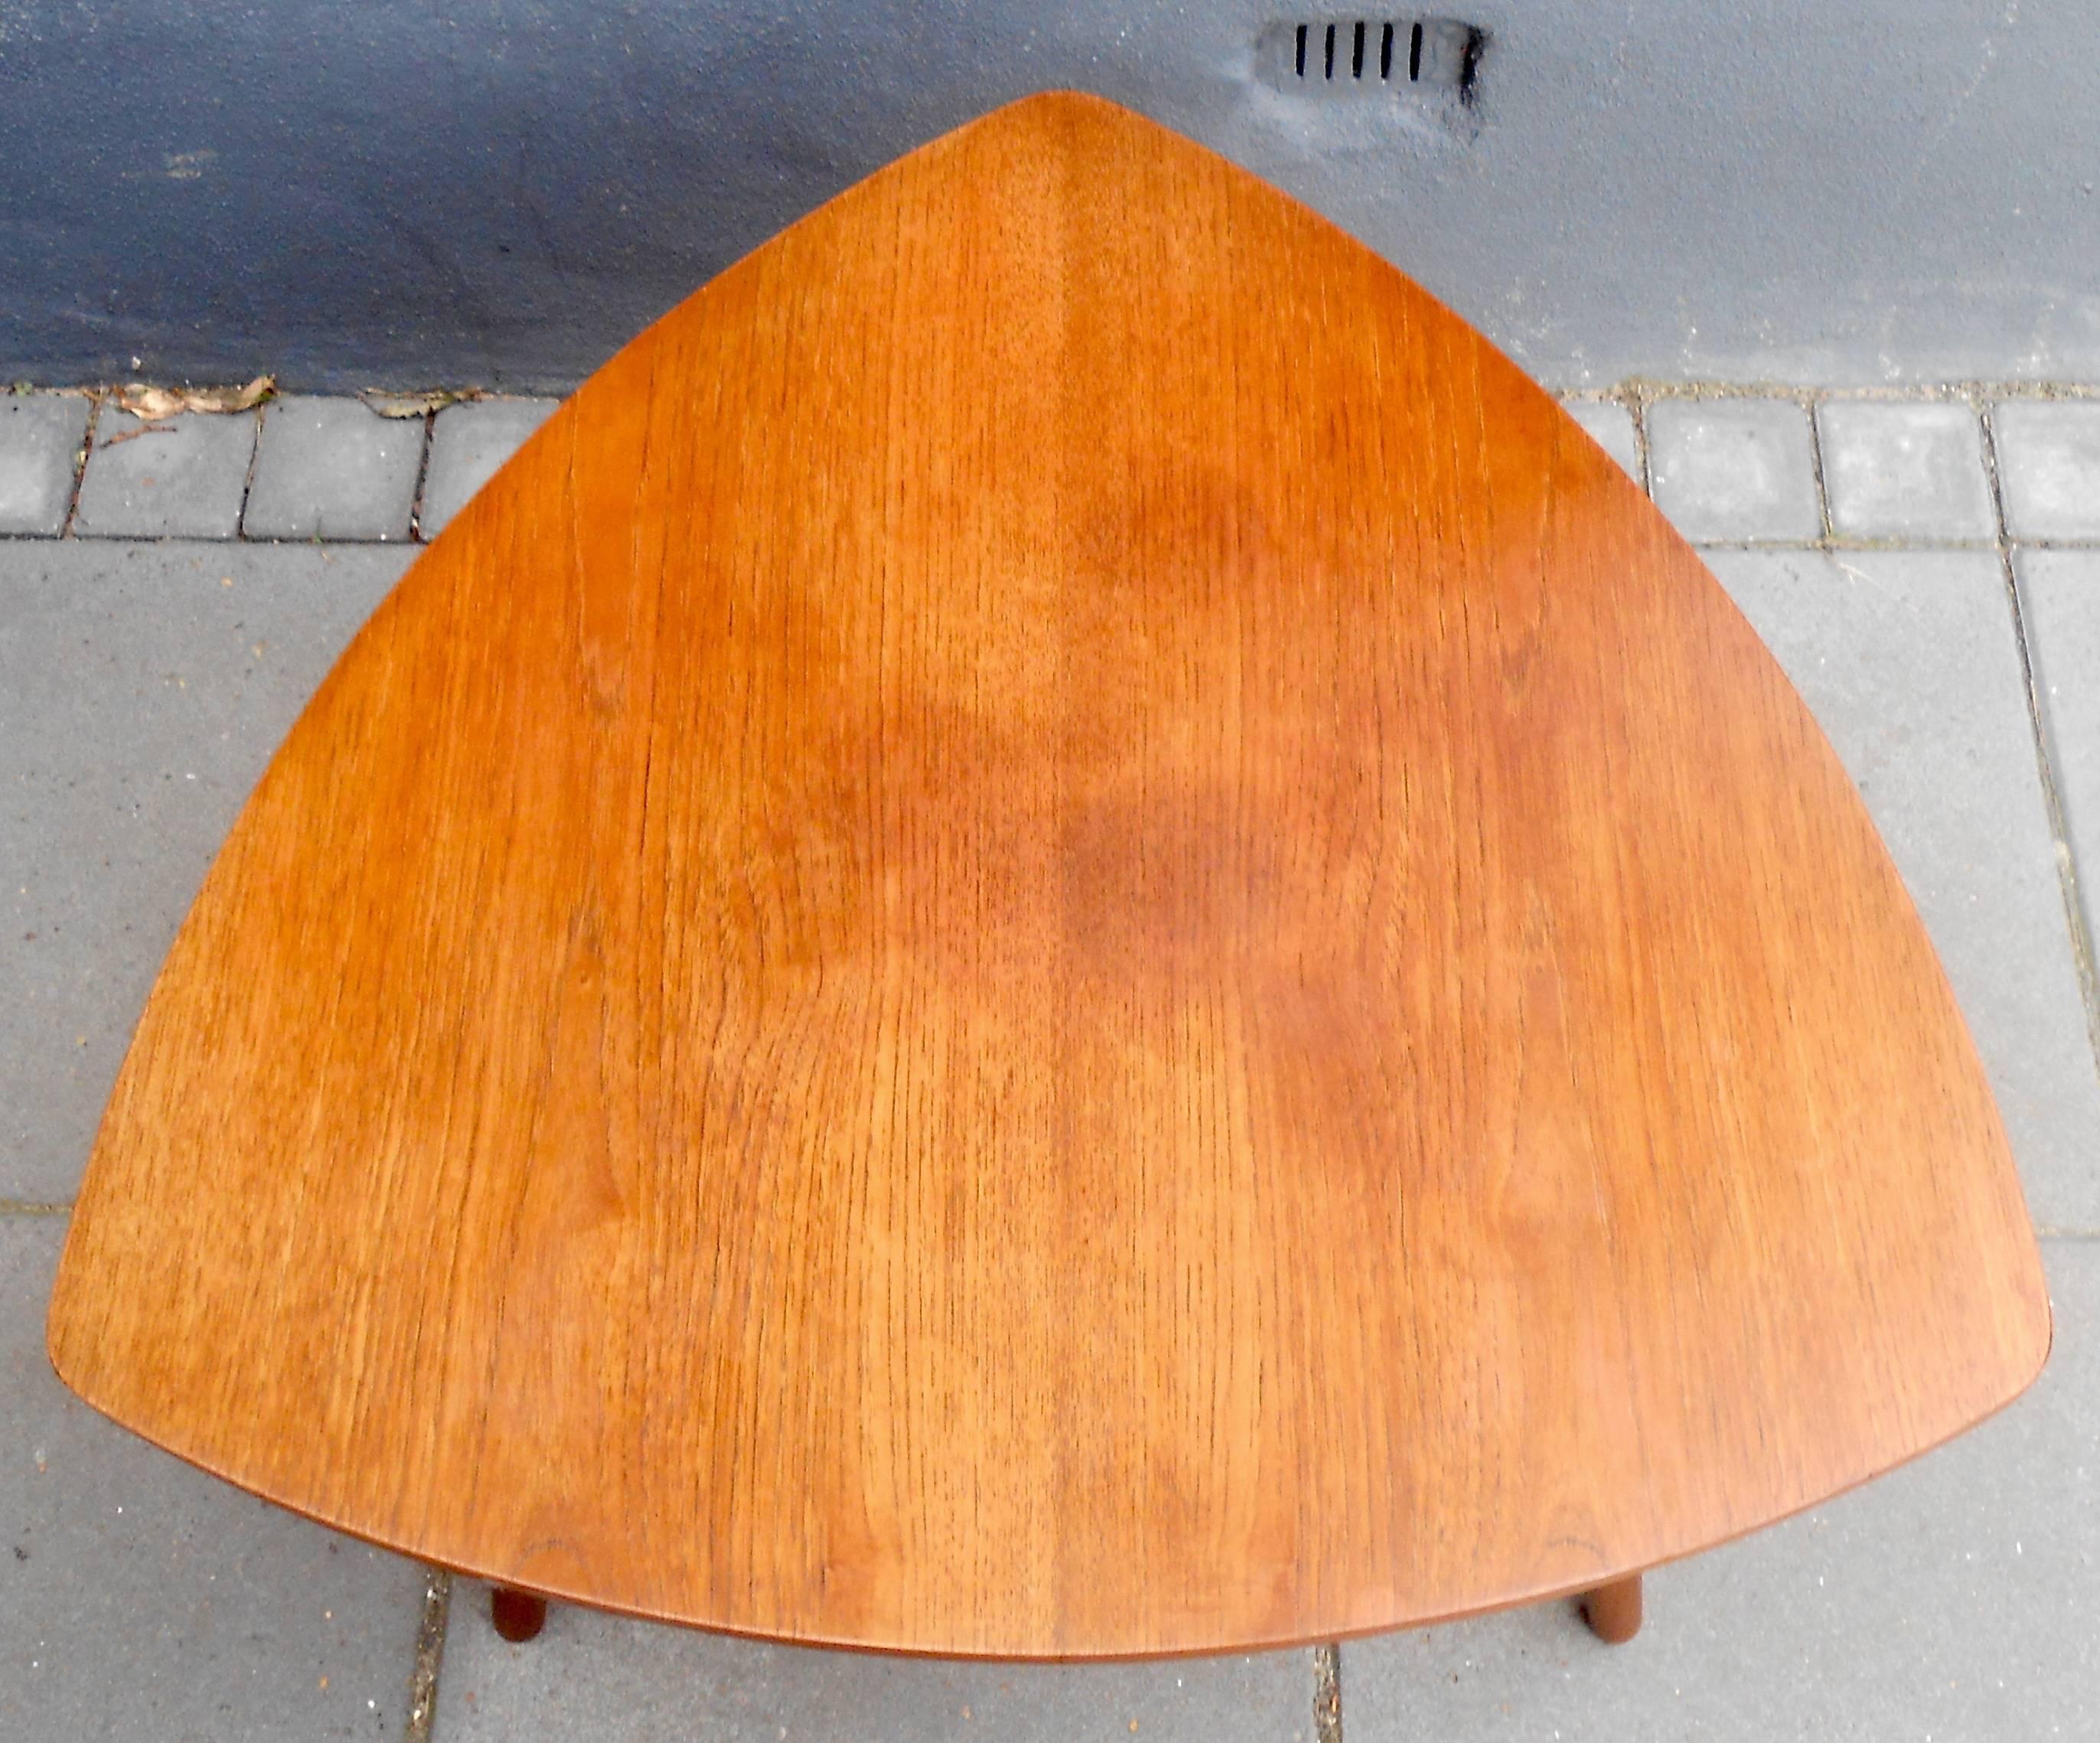 This small teak coffee table in the shape of a guitar pick was manufactured in Denmark during the early 1960s. The designer/maker is un-identified. Measurements: 24 x 24 inches with a height of 19 inches. The table will be shipped with its legs